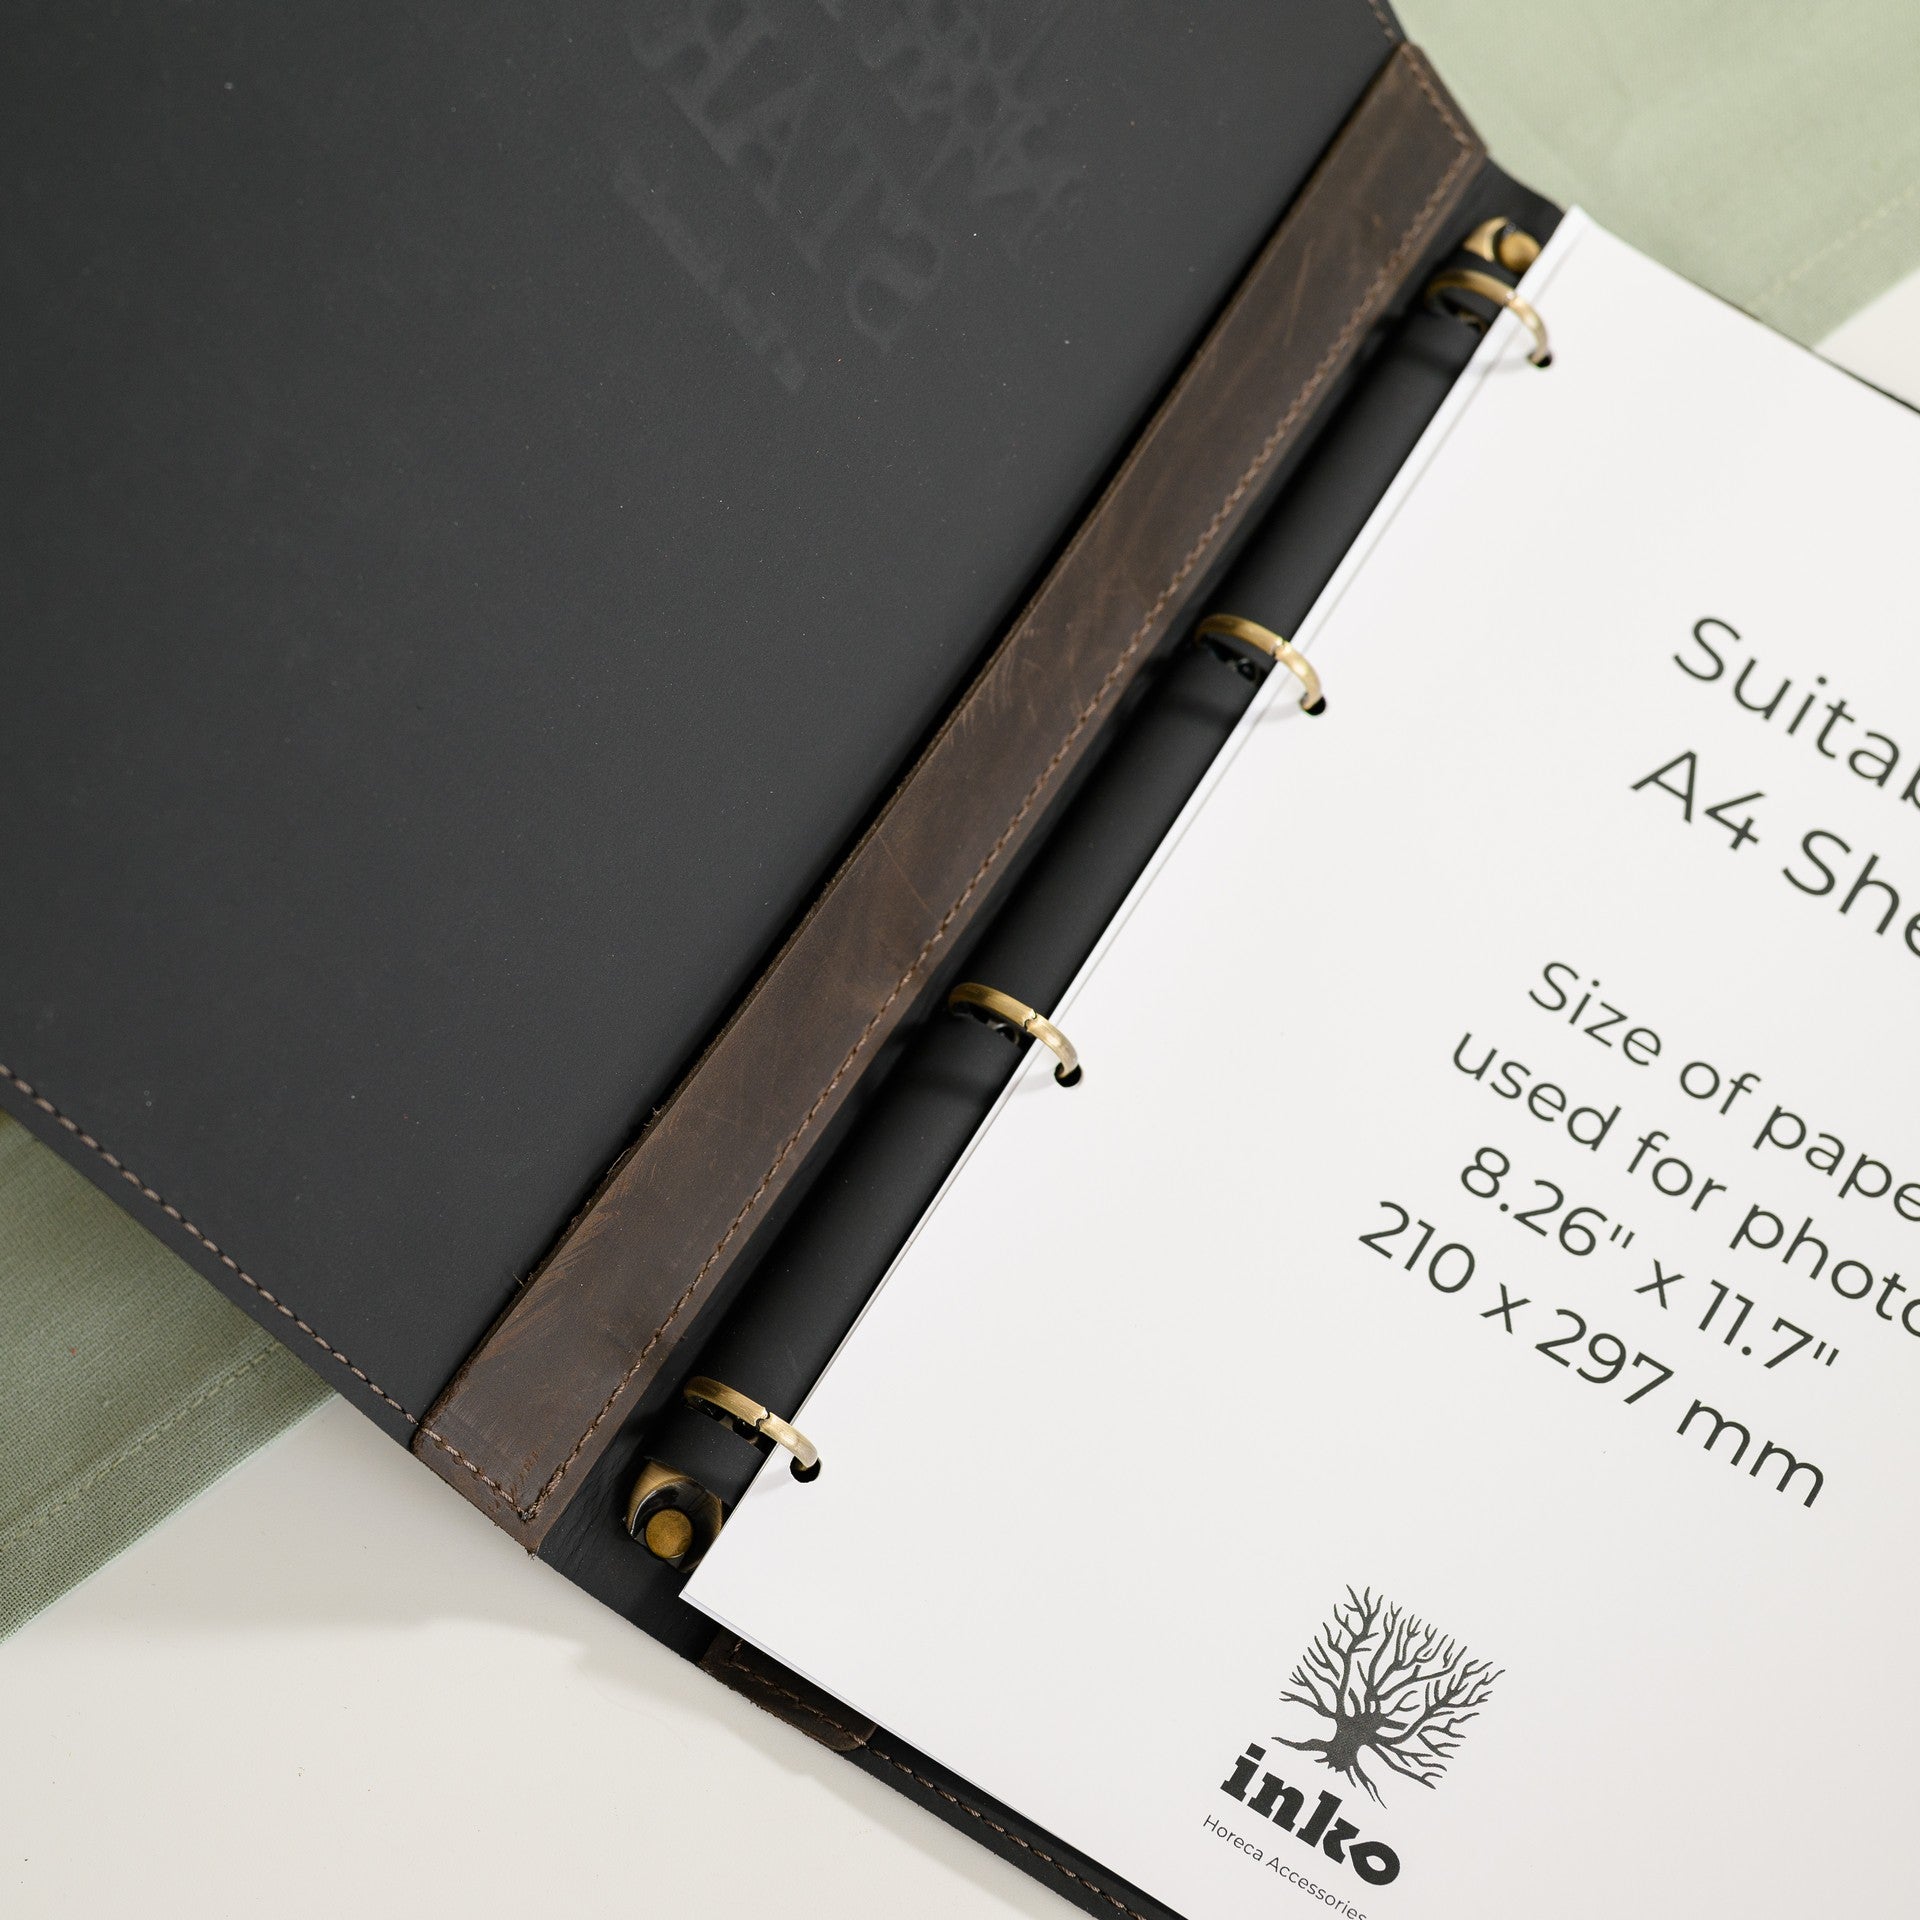 Our leather menu holder with binder combines functionality and luxury for a polished look.